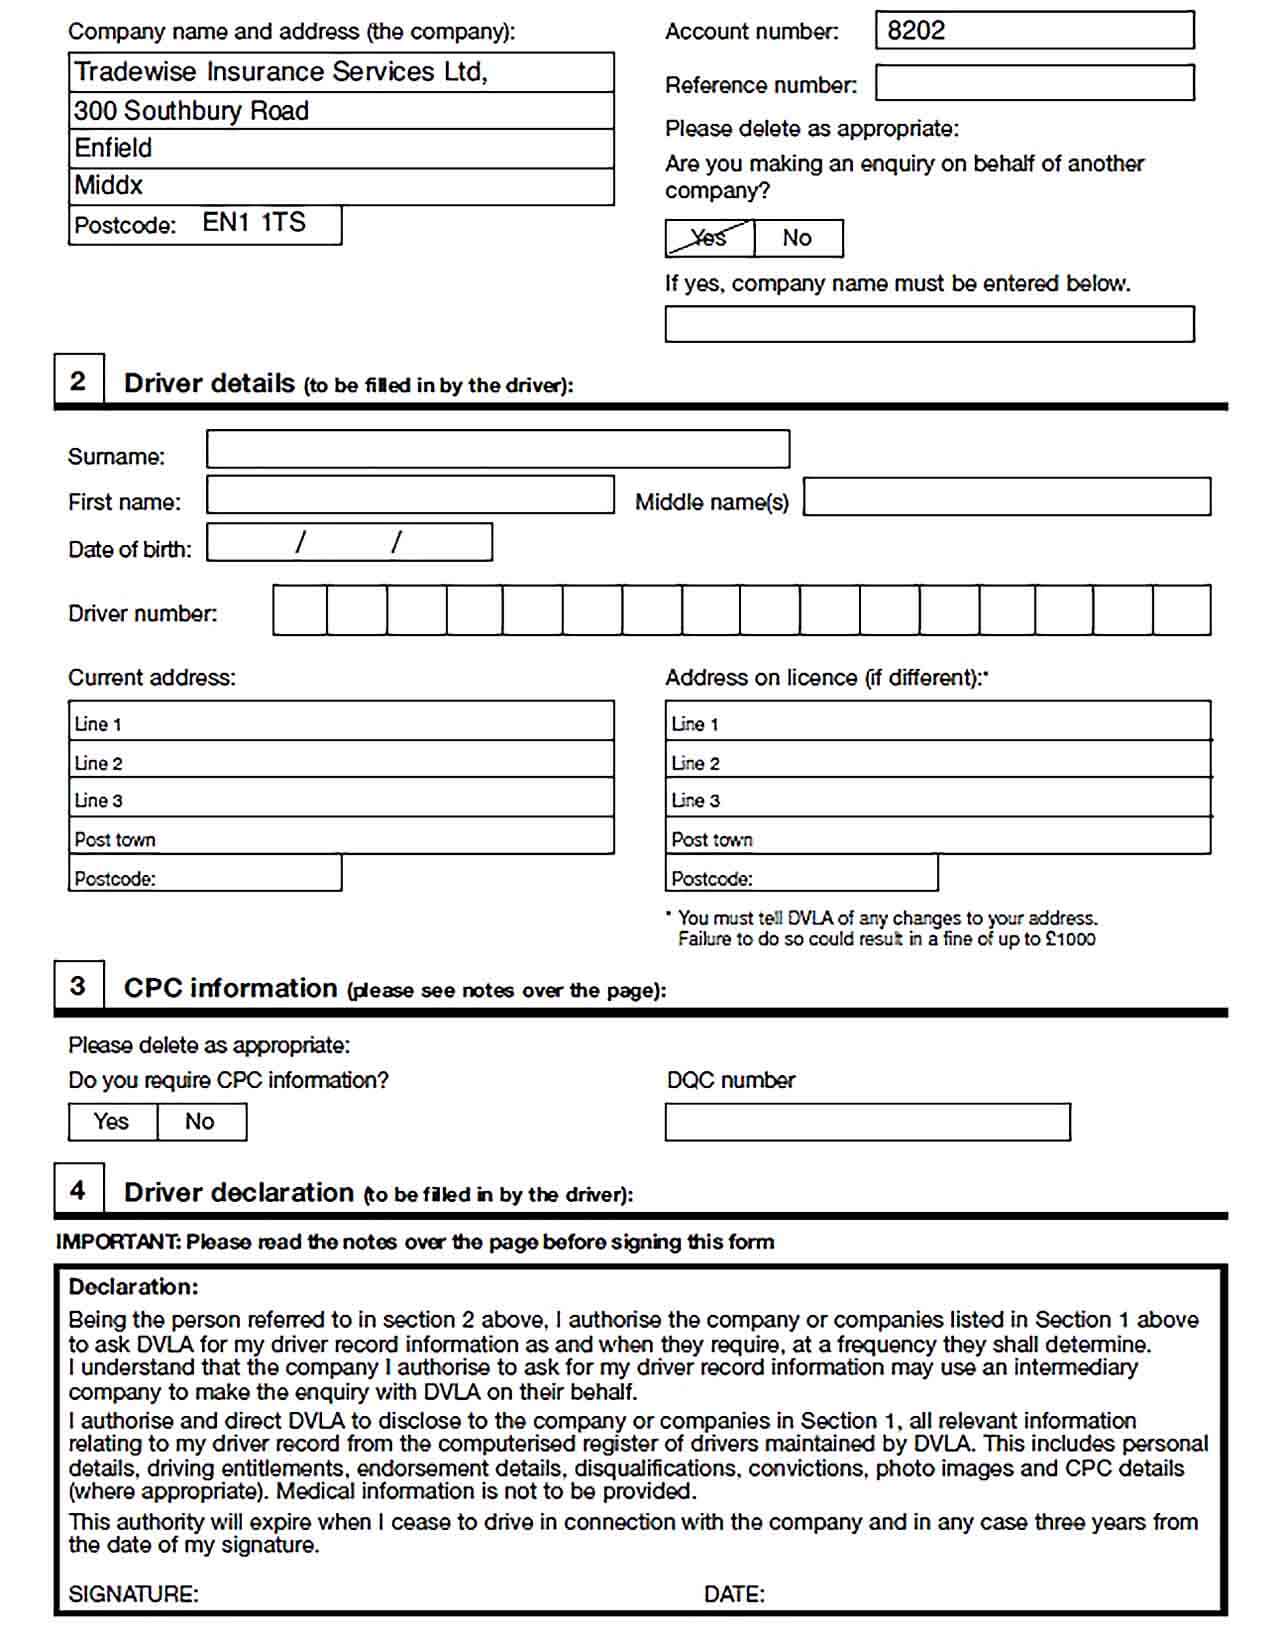 Sample Commercial Vehicle Accident Report Form Template